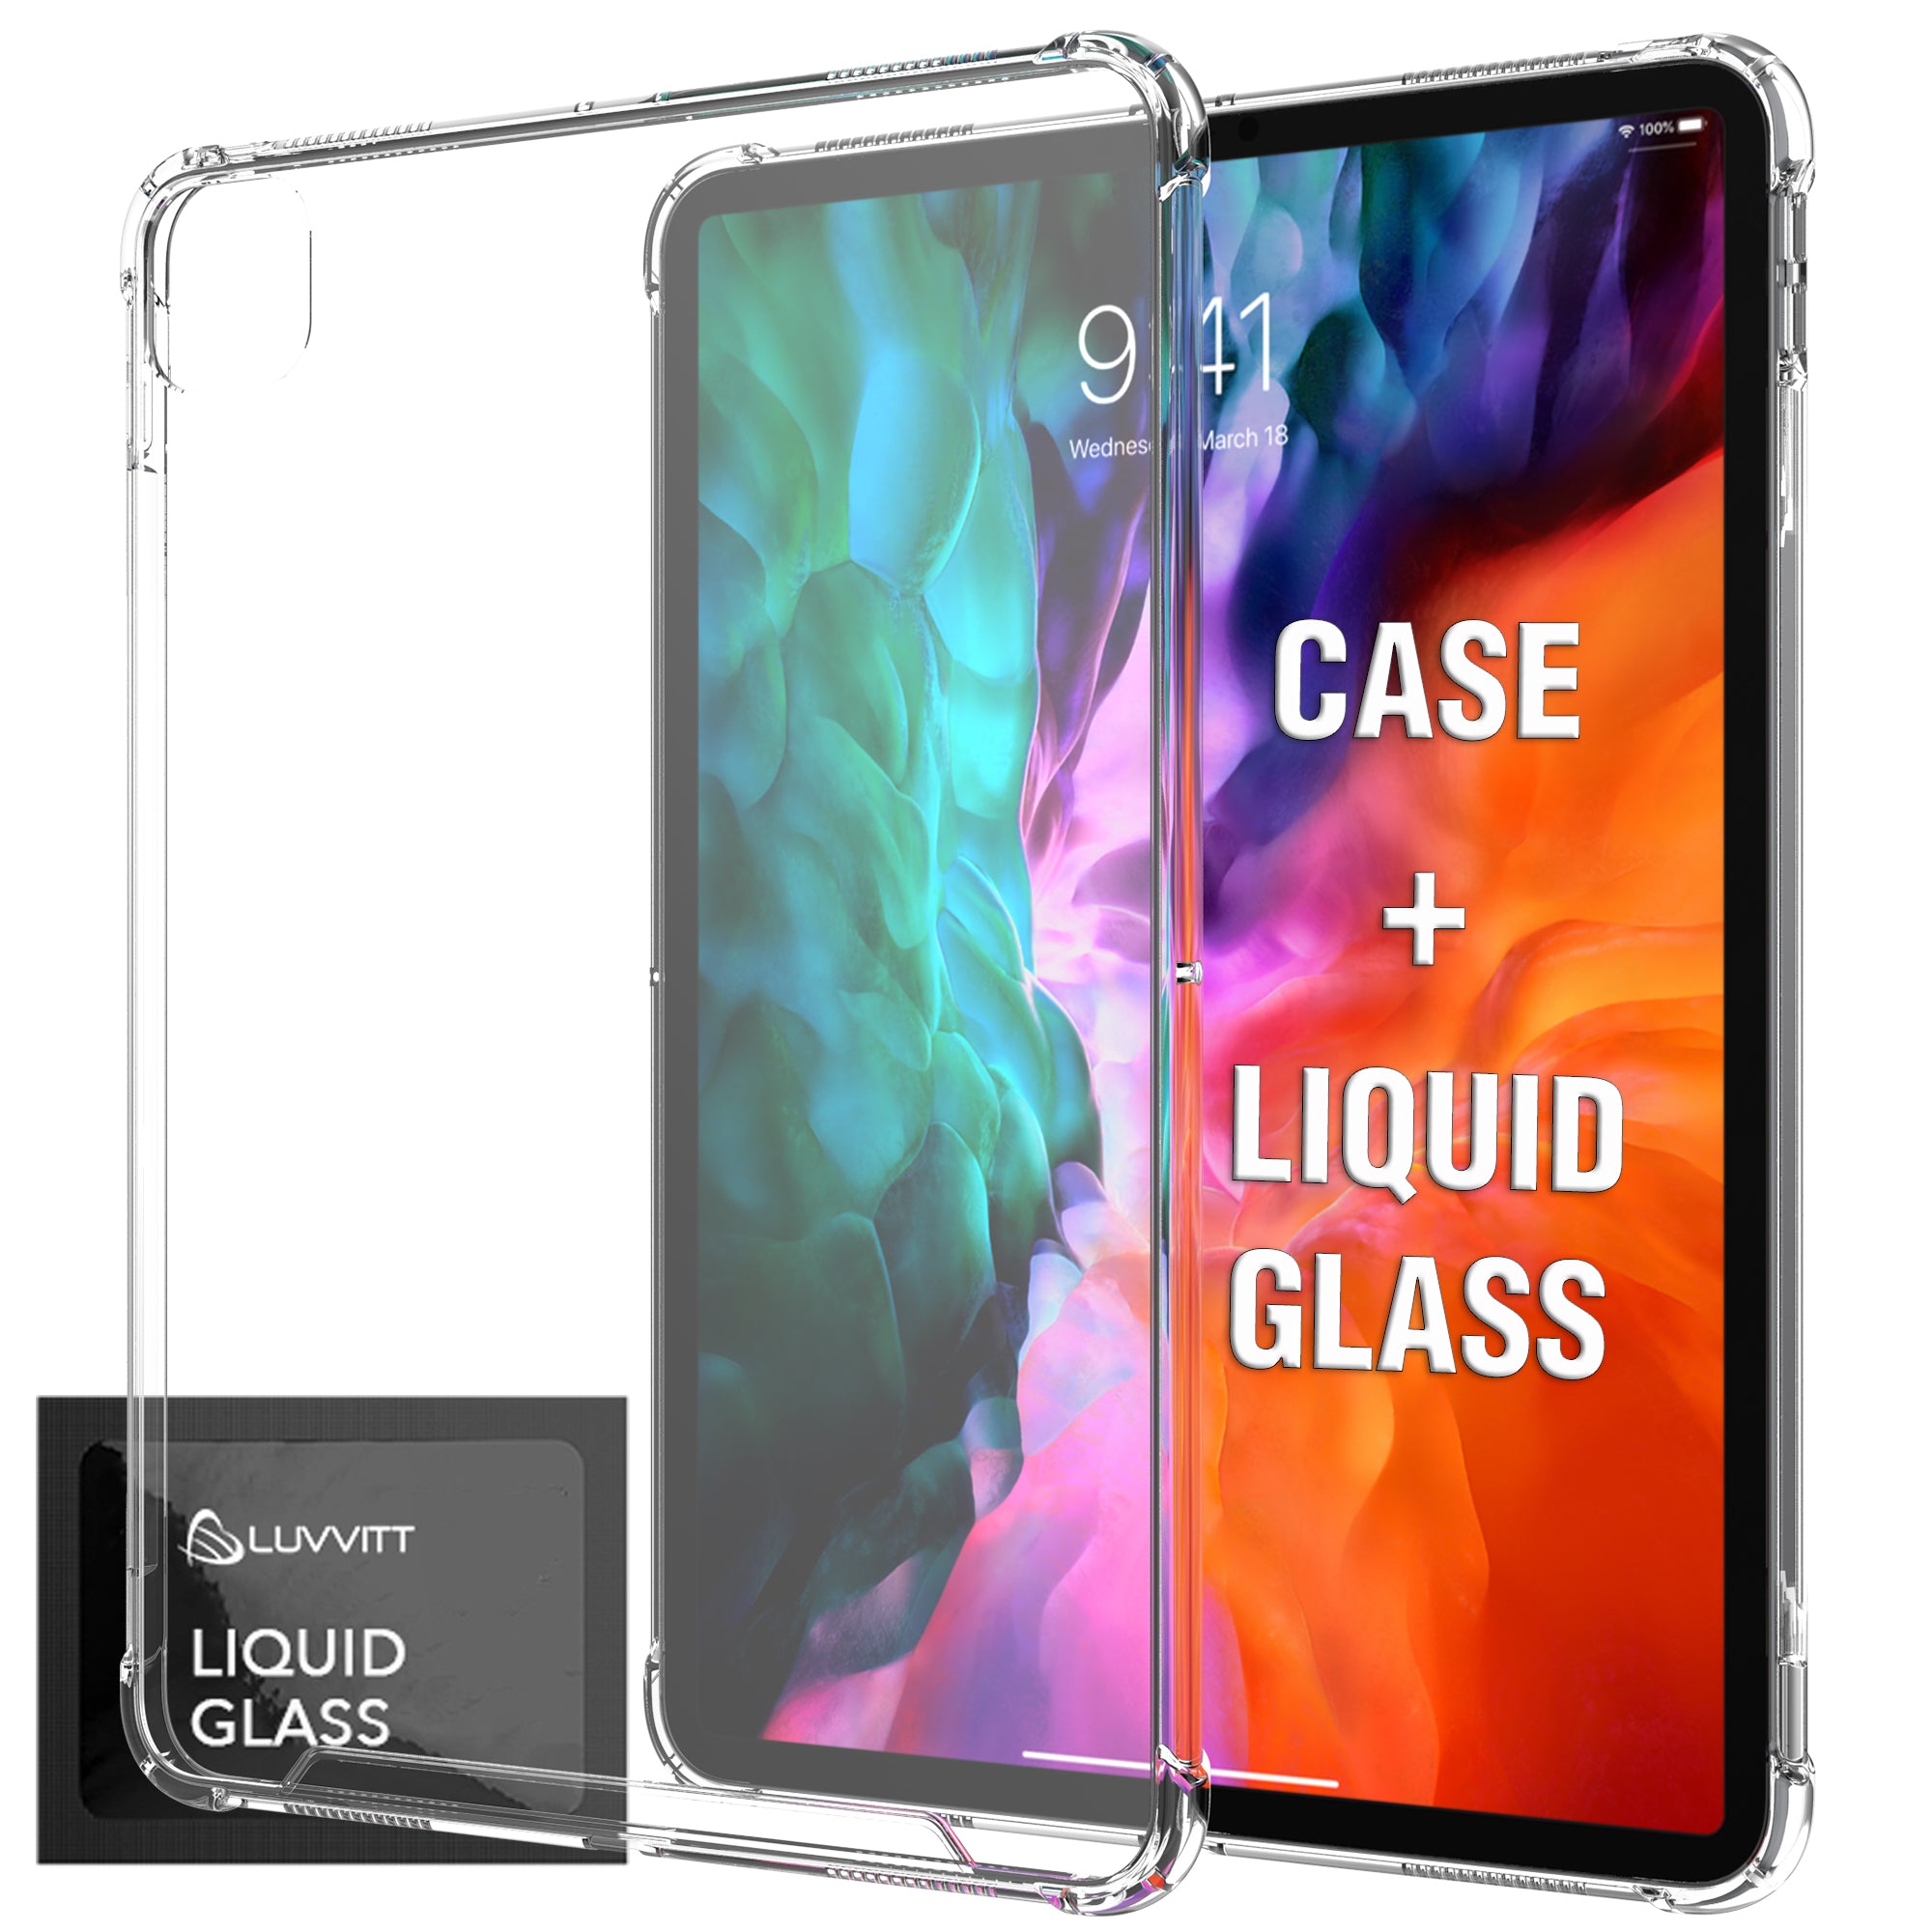 iPad Pro 12.9 Case 2020 Luvvitt Clear View Case and Liquid Glass Screen Protector